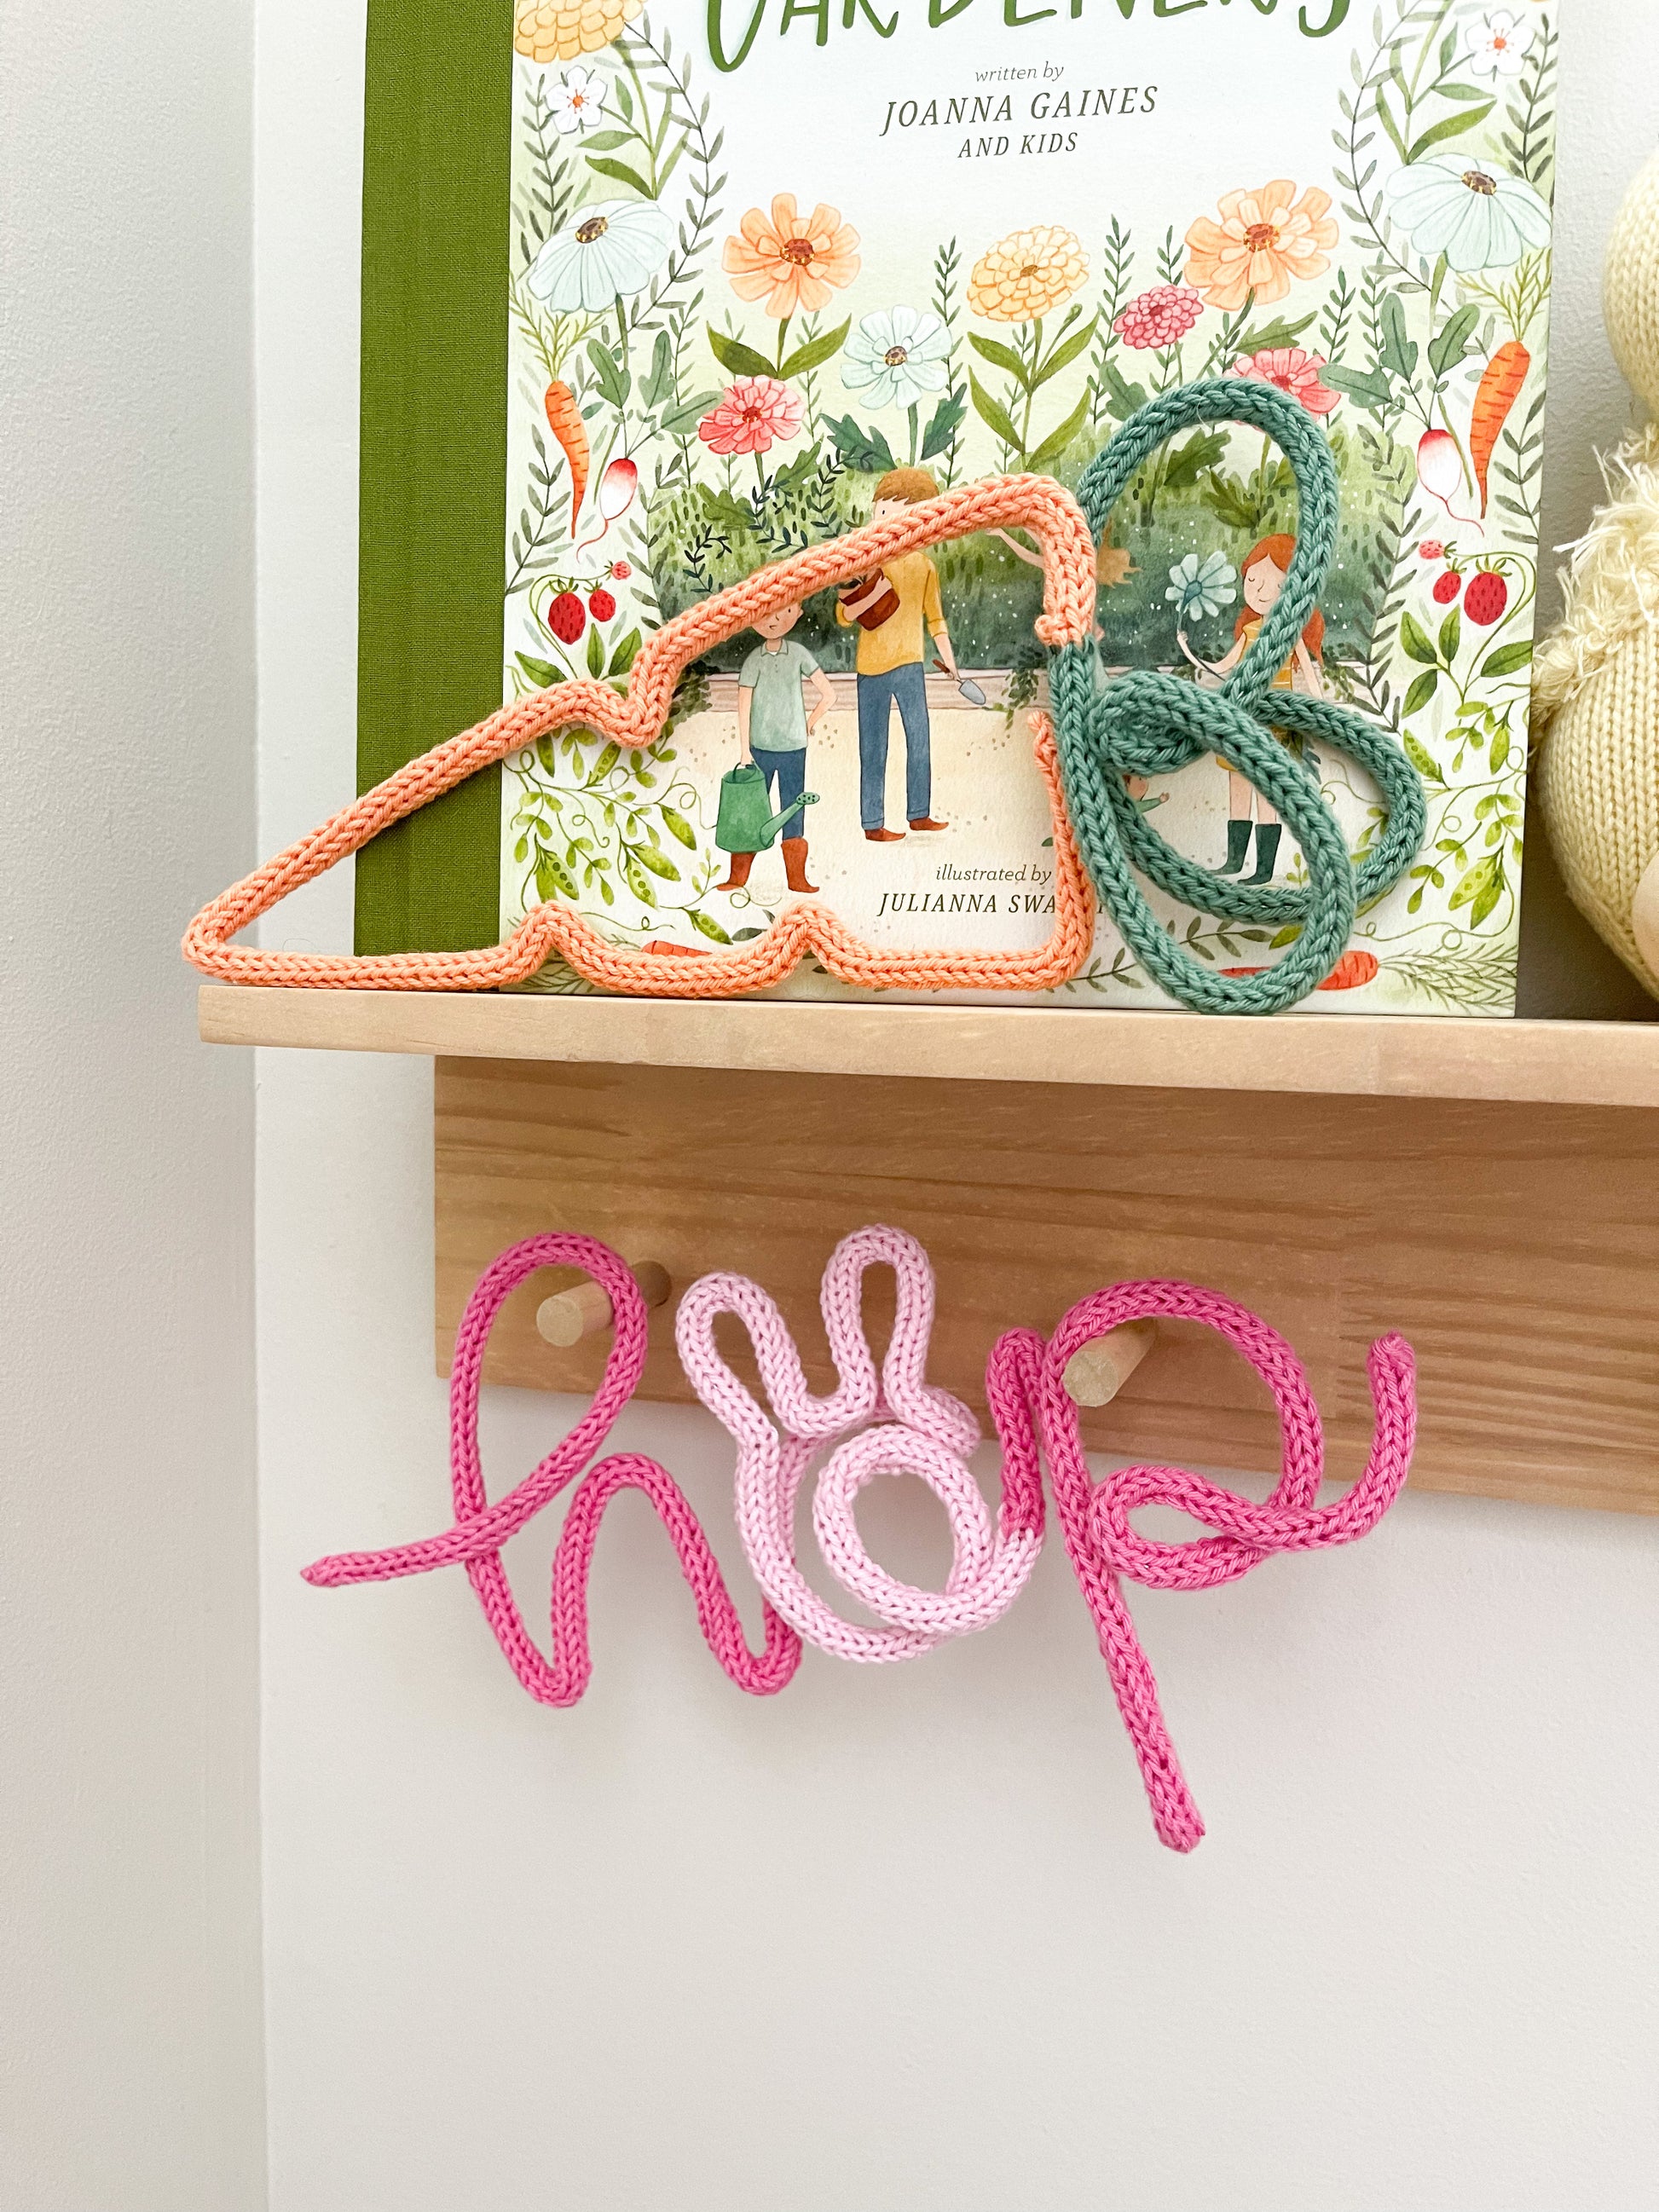 Knitted wire word "hop" featuring bunny ears. It's hanging on a peg rail styled shelfie.